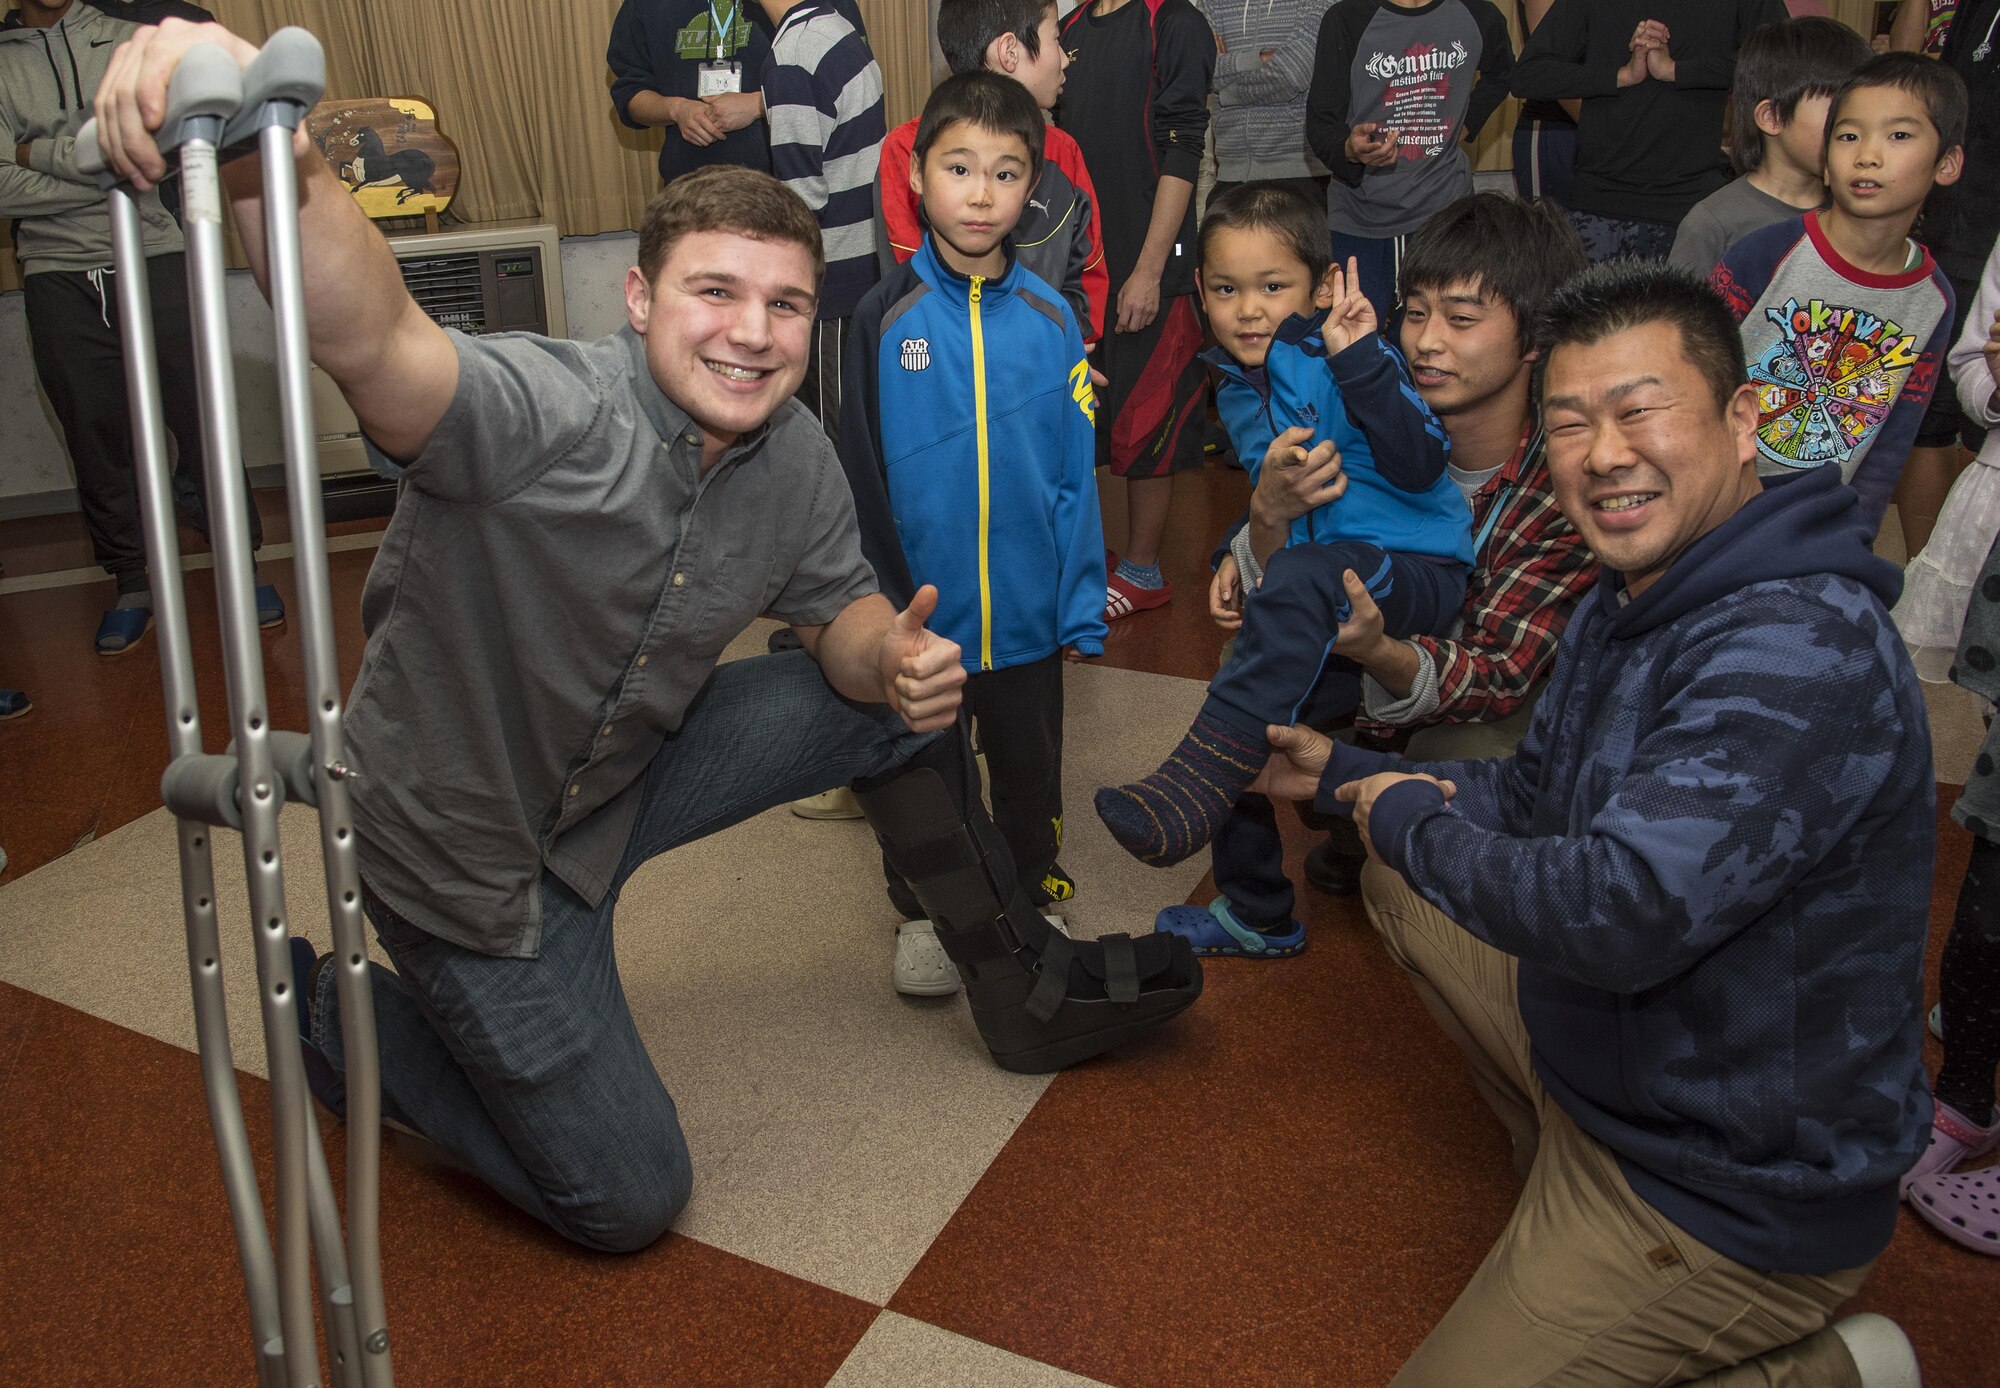 U.S. Air Force Airman Russel Plunkey, left, a 35th Civil Engineer Squadron pavements and equipment technician, poses with Yuussei, a Shichinohe Orphanage member, to show their boots at Shichinohe, Japan, Dec. 23, 2016. The squadron brought gifts to each orphan as well as donated a flat screen TV and a Wii gaming system to the facility. (U.S. Air Force photo by Airman 1st Class Sadie Colbert)